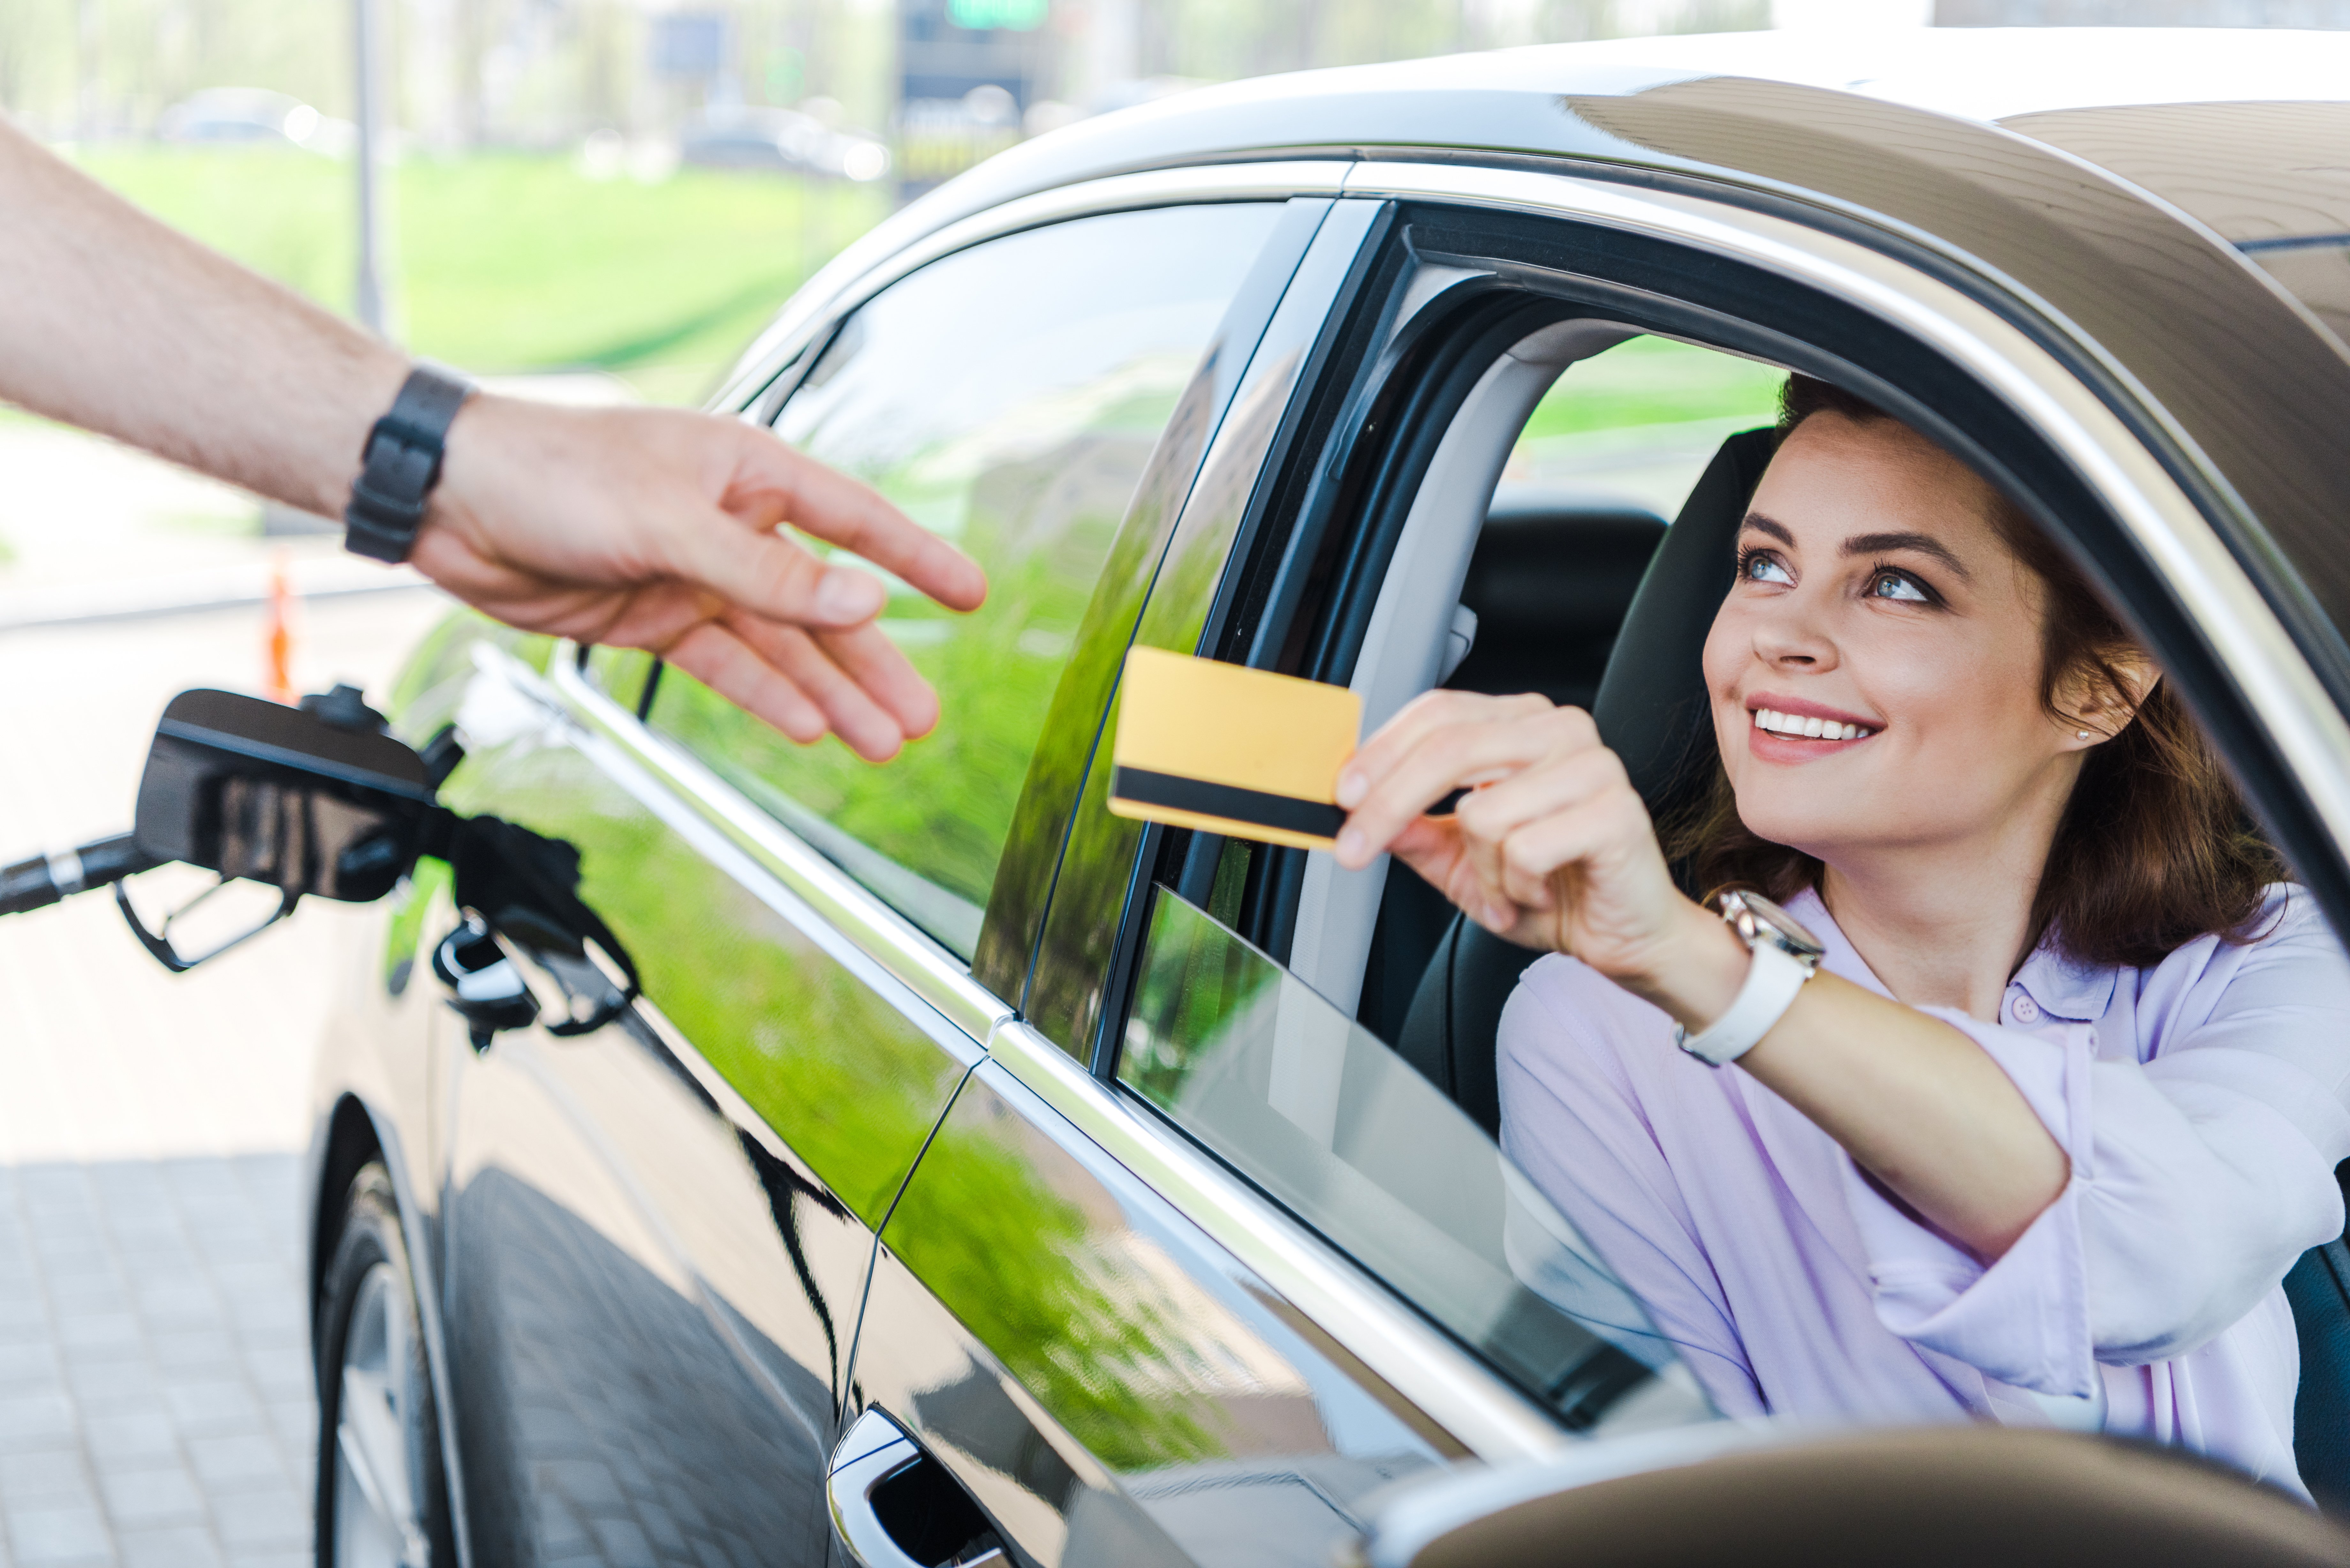 See our list of the best cards for gas purchases! Source: Adobe Stock